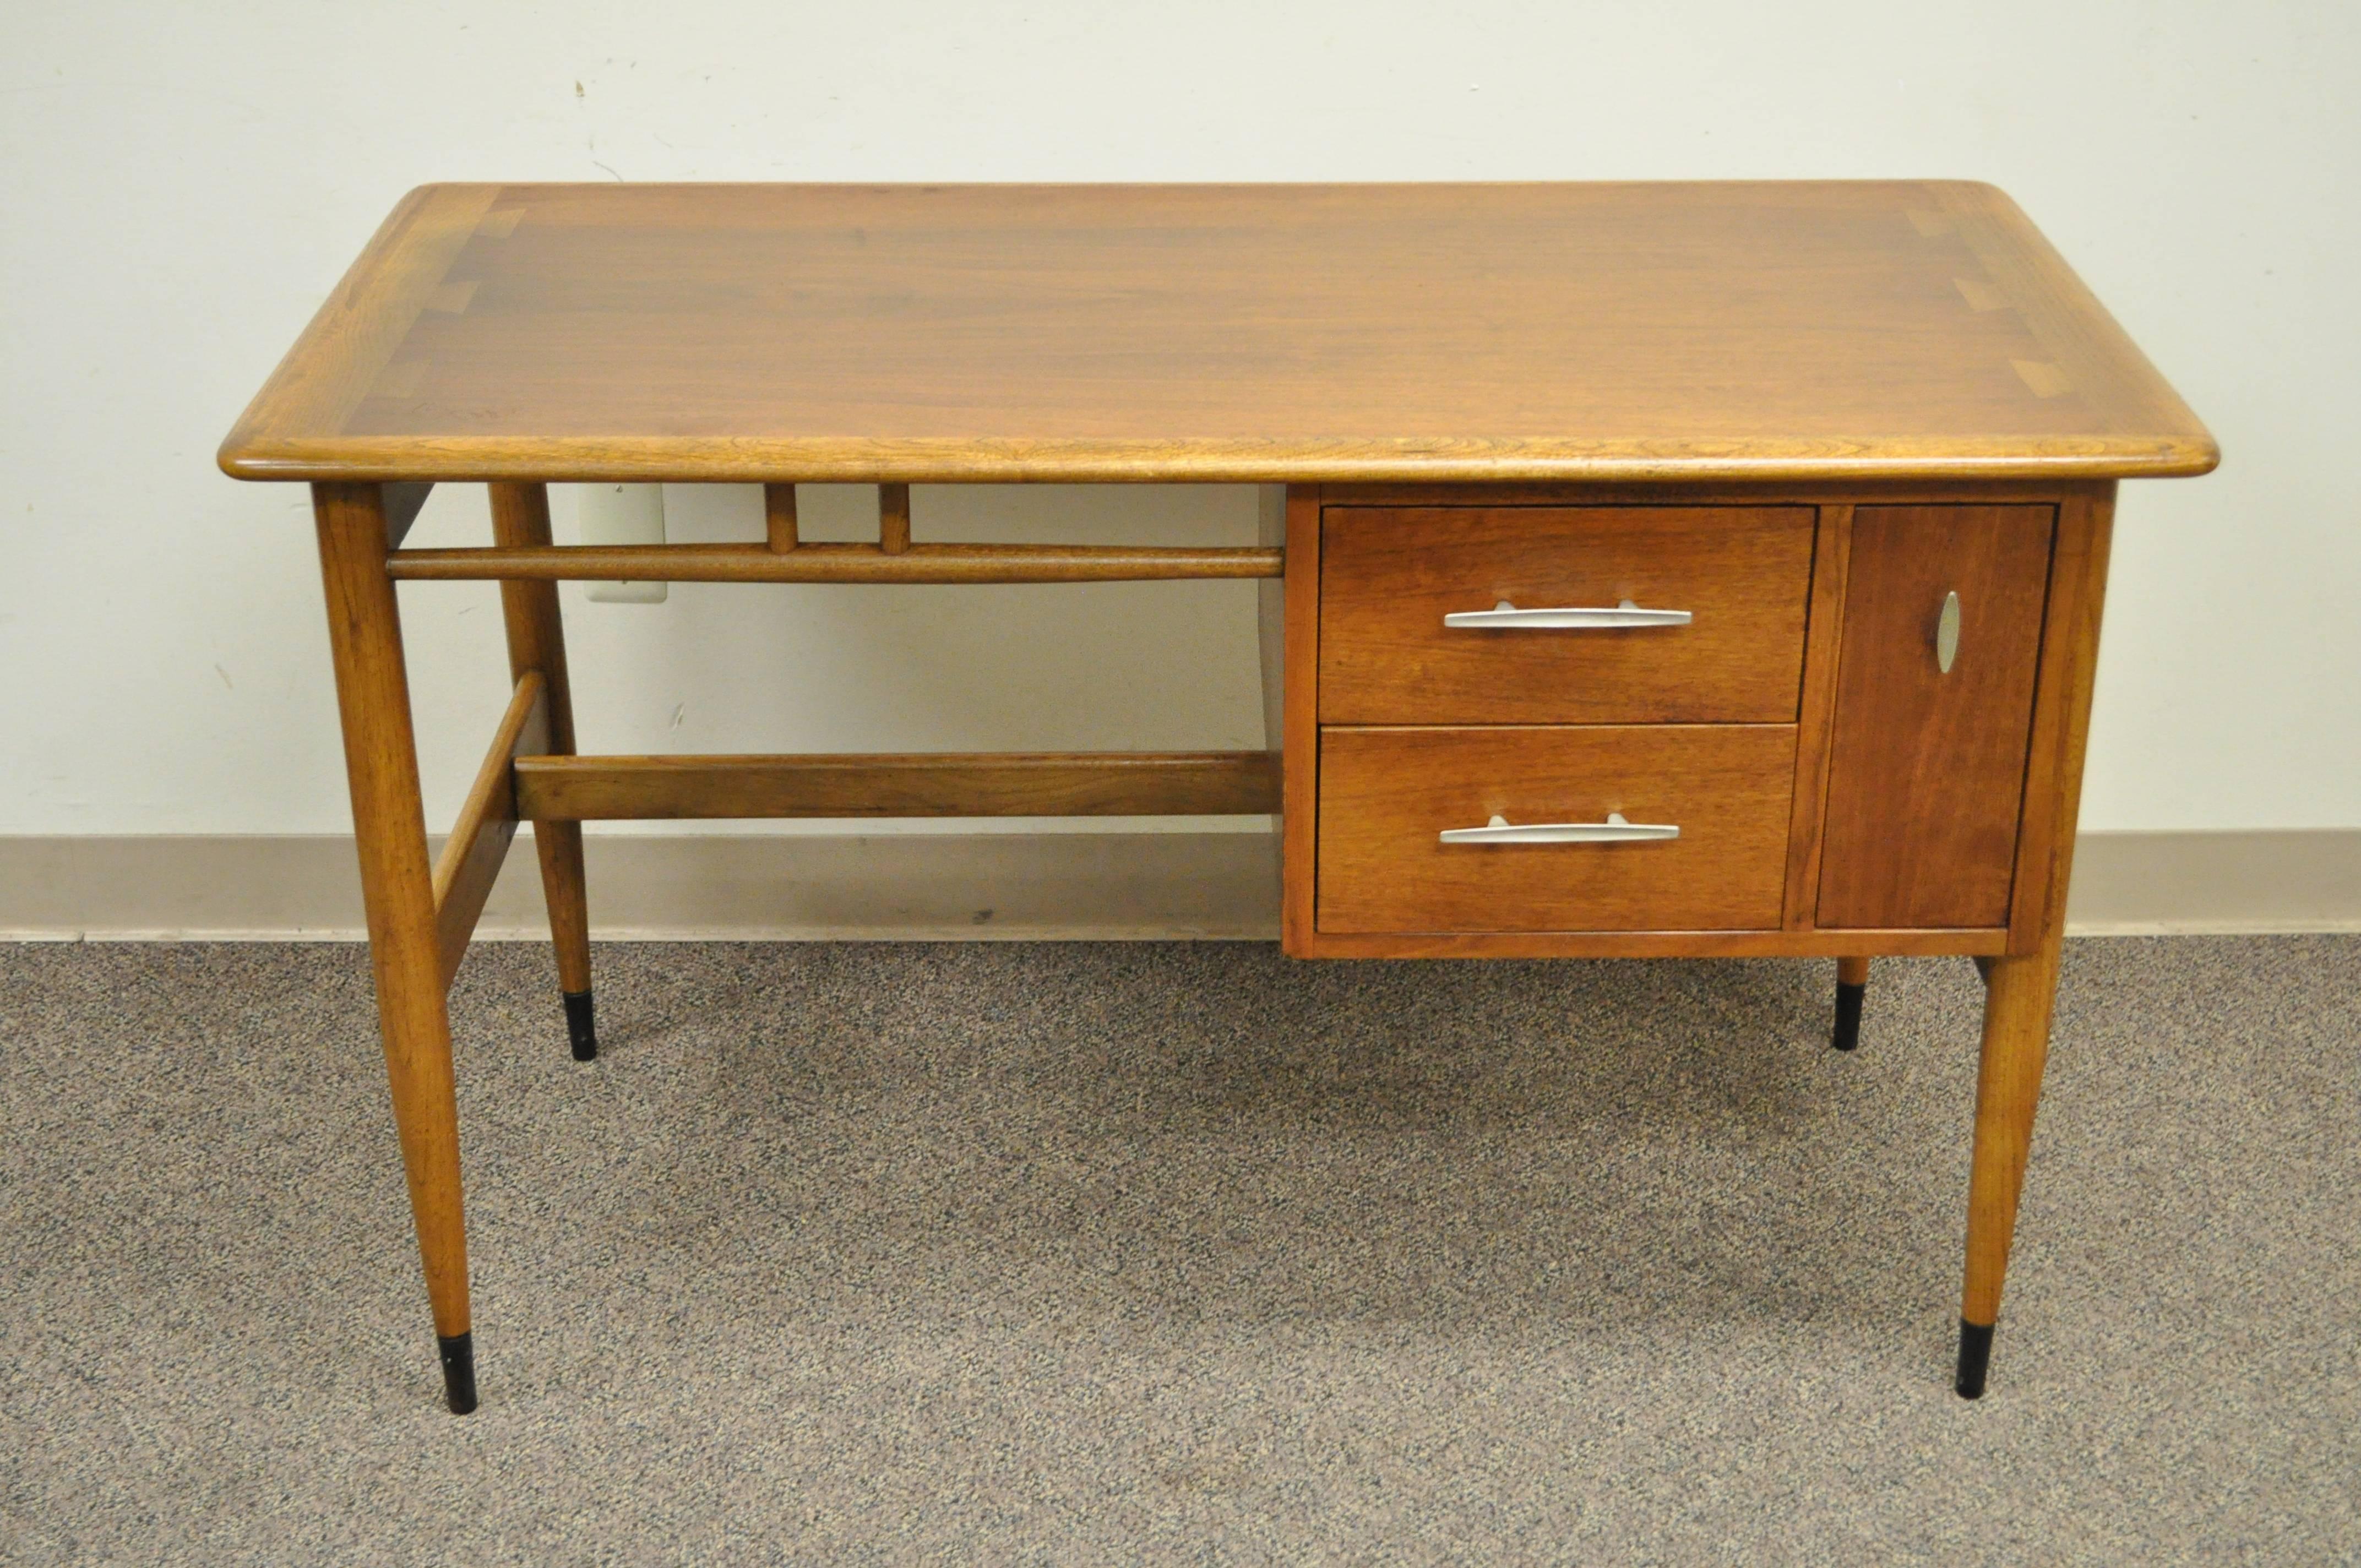 Vintage Mid-Century Modern walnut writing desk by Lane designed by Andre Bus in the Danish modern style. Item features solid wood construction, dovetailed top, three dovetail constructed drawers, finished back, sleek modernist lines, great American